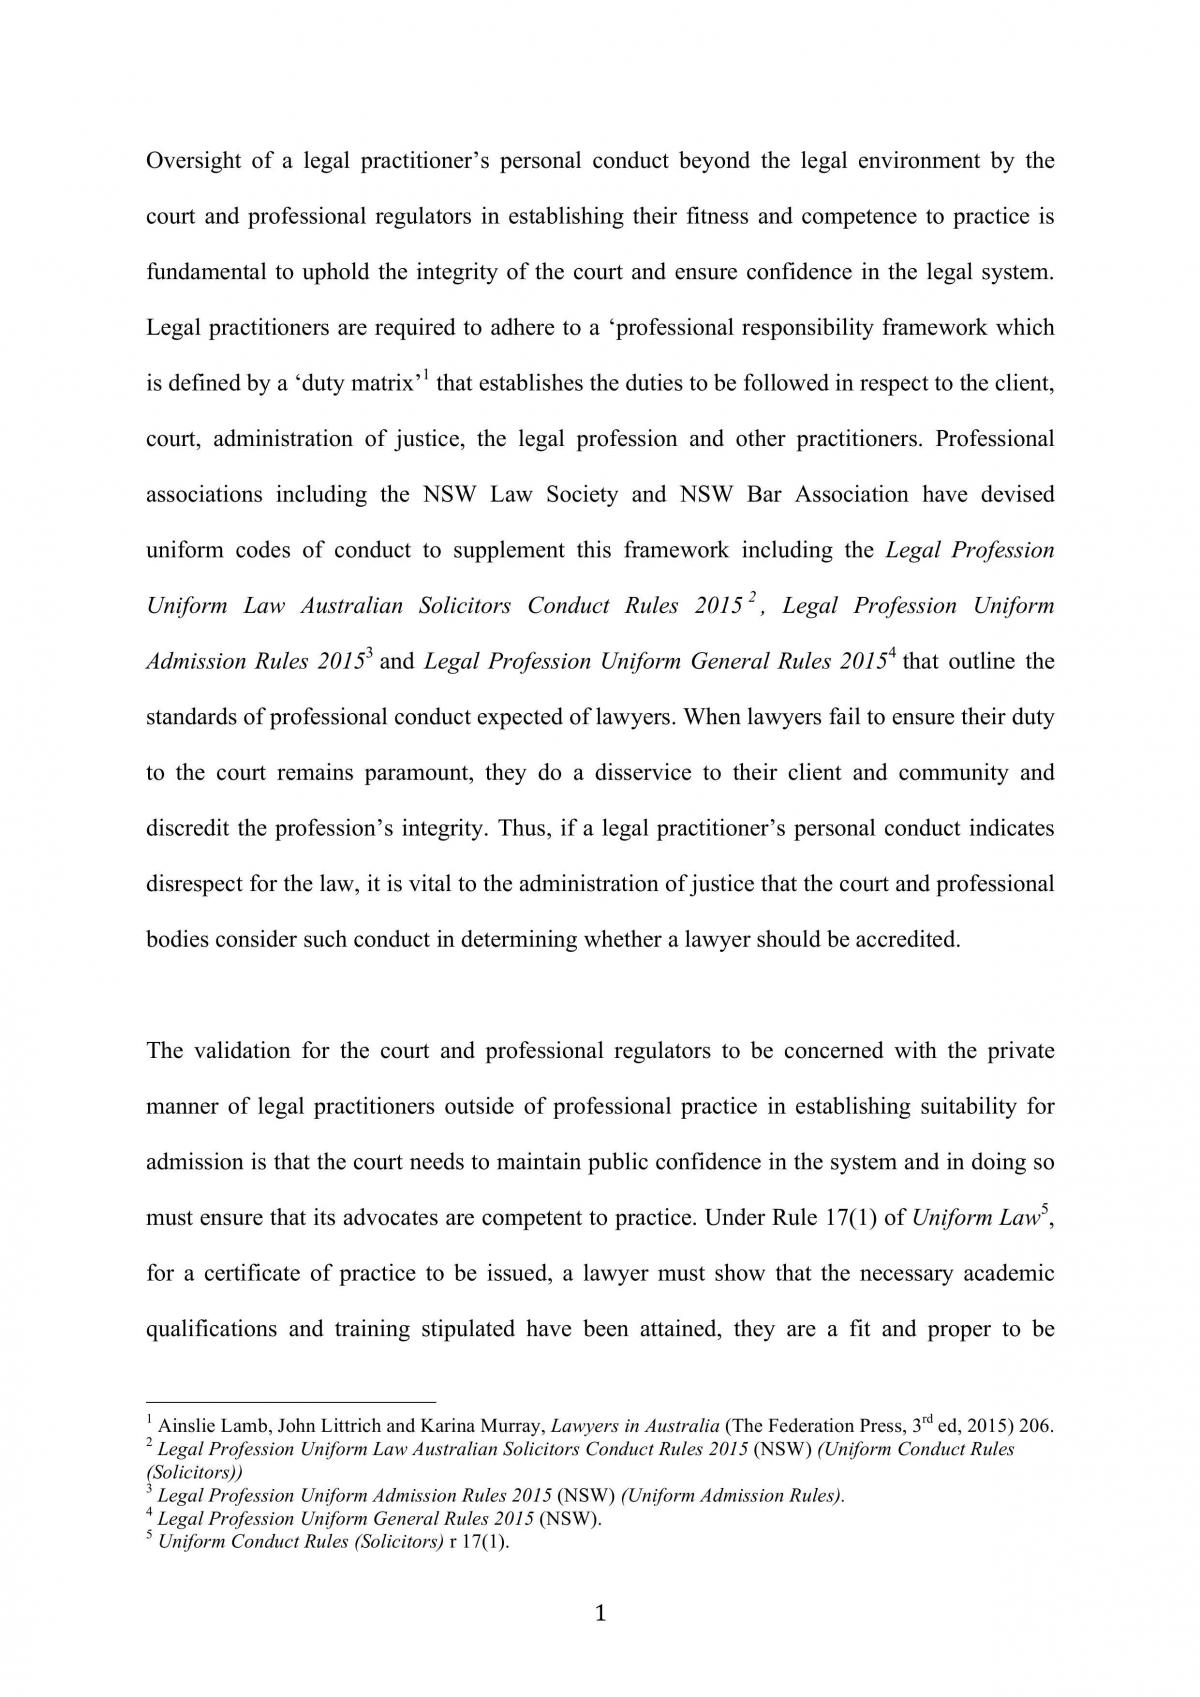 Lawyers and Australian Society Assignment on 'Whether the judicial process should be concerned with conduct of Legal Practitioner' - Page 1